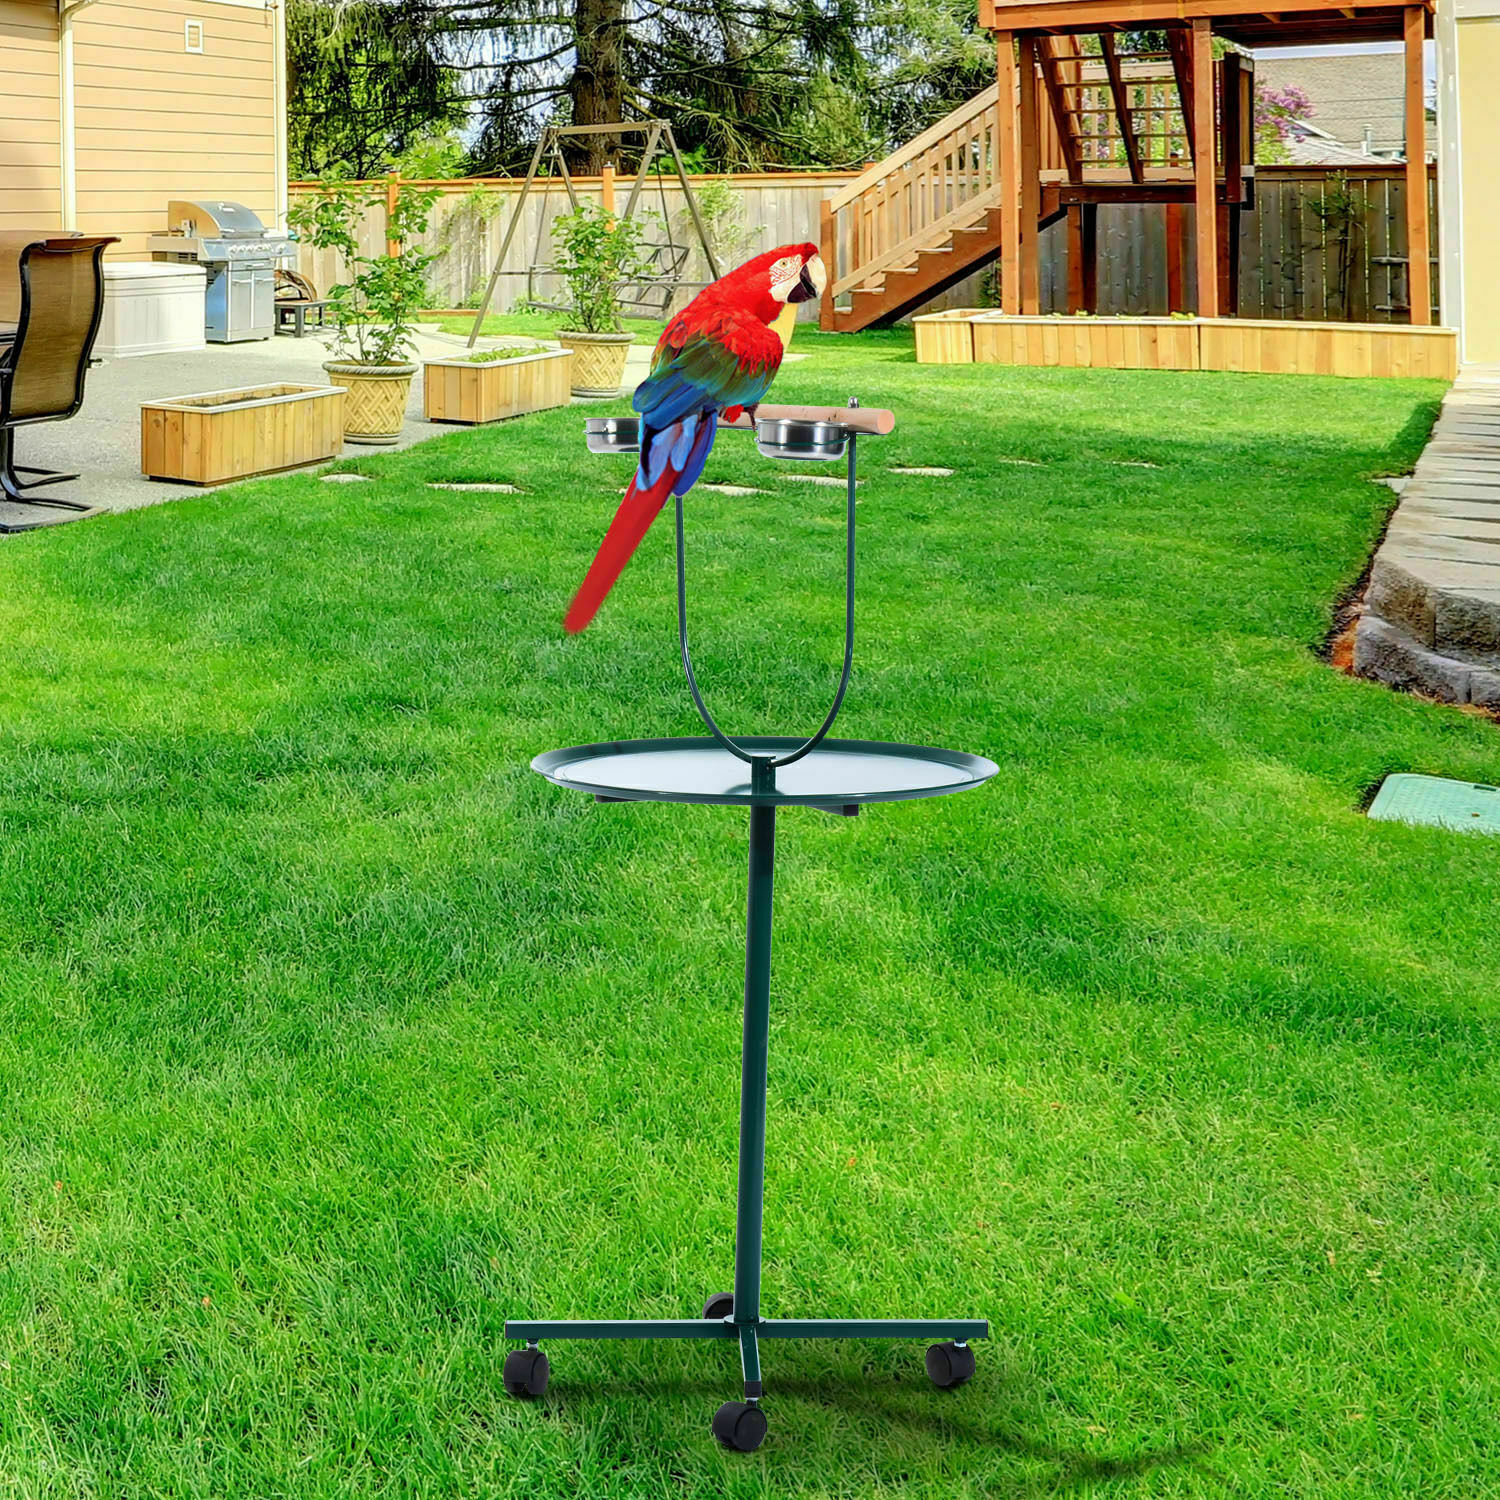 49" Bird Parrot Play Stand Cockatoo Gym Perch Metal Tray Feeder W/ Bowls Wheels